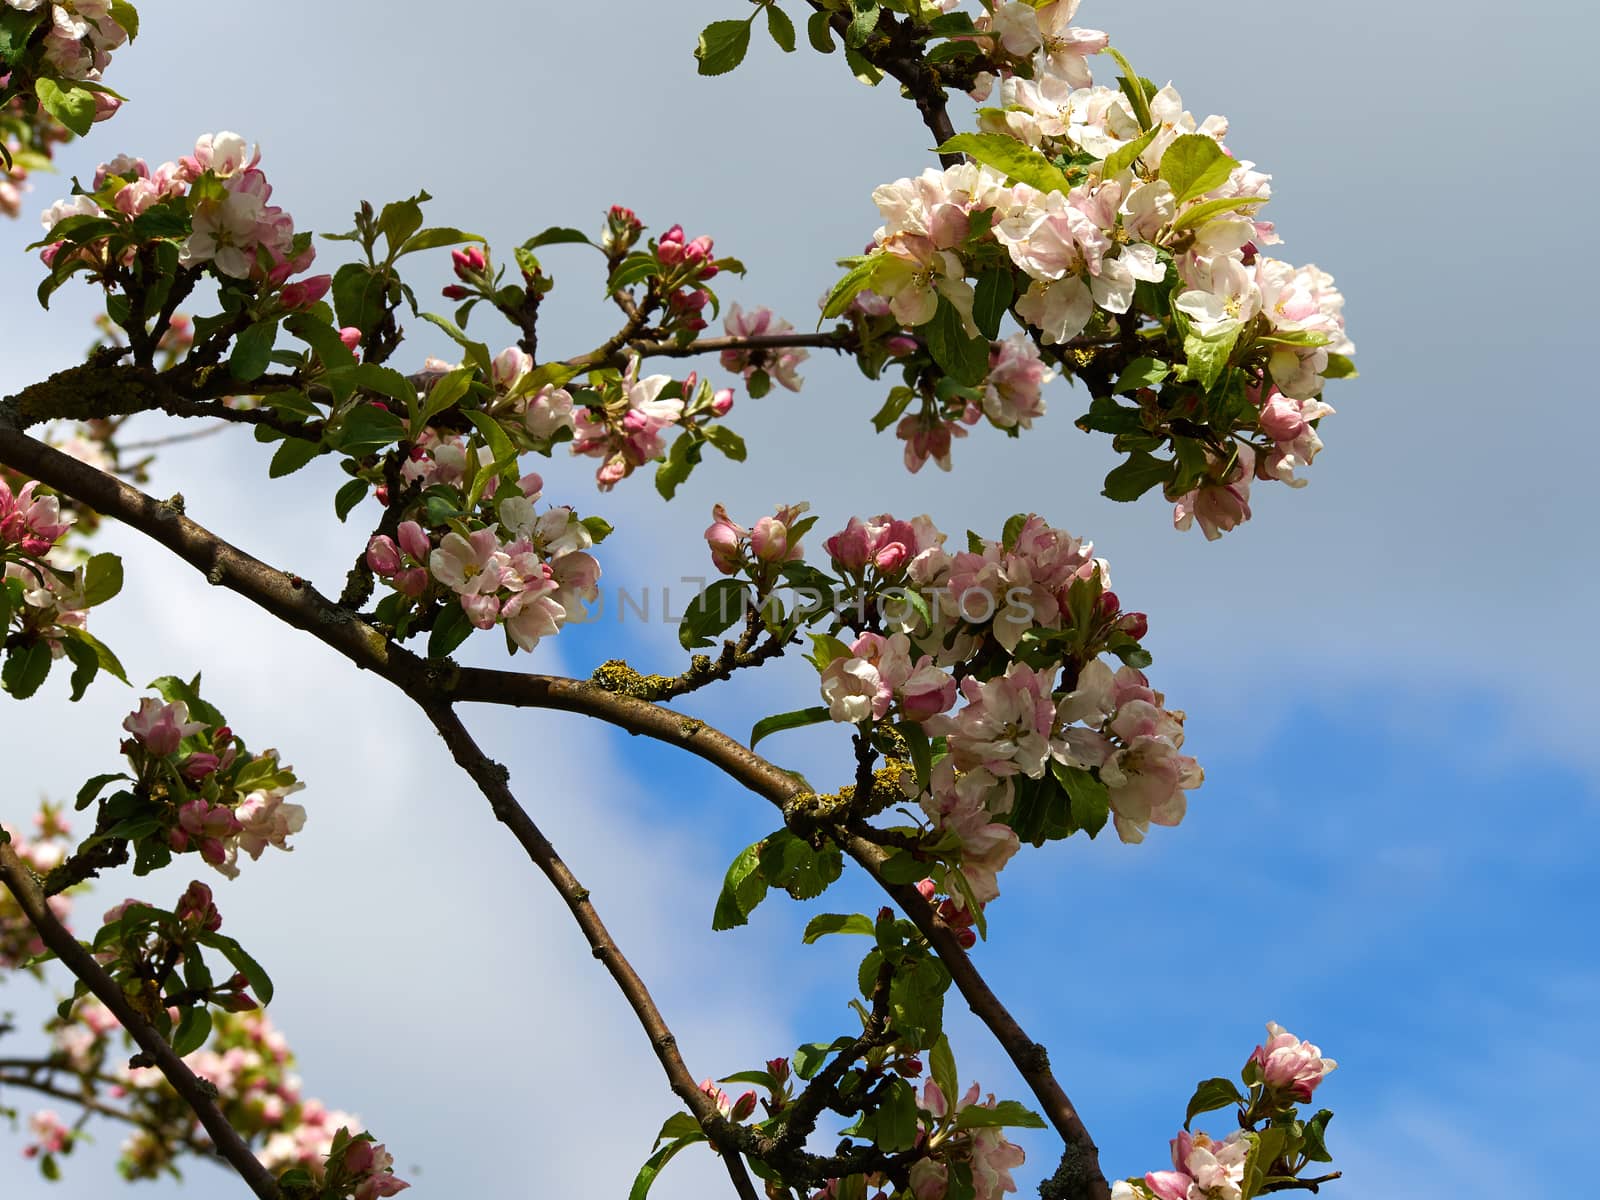 Blooming apple tree branches by Ronyzmbow